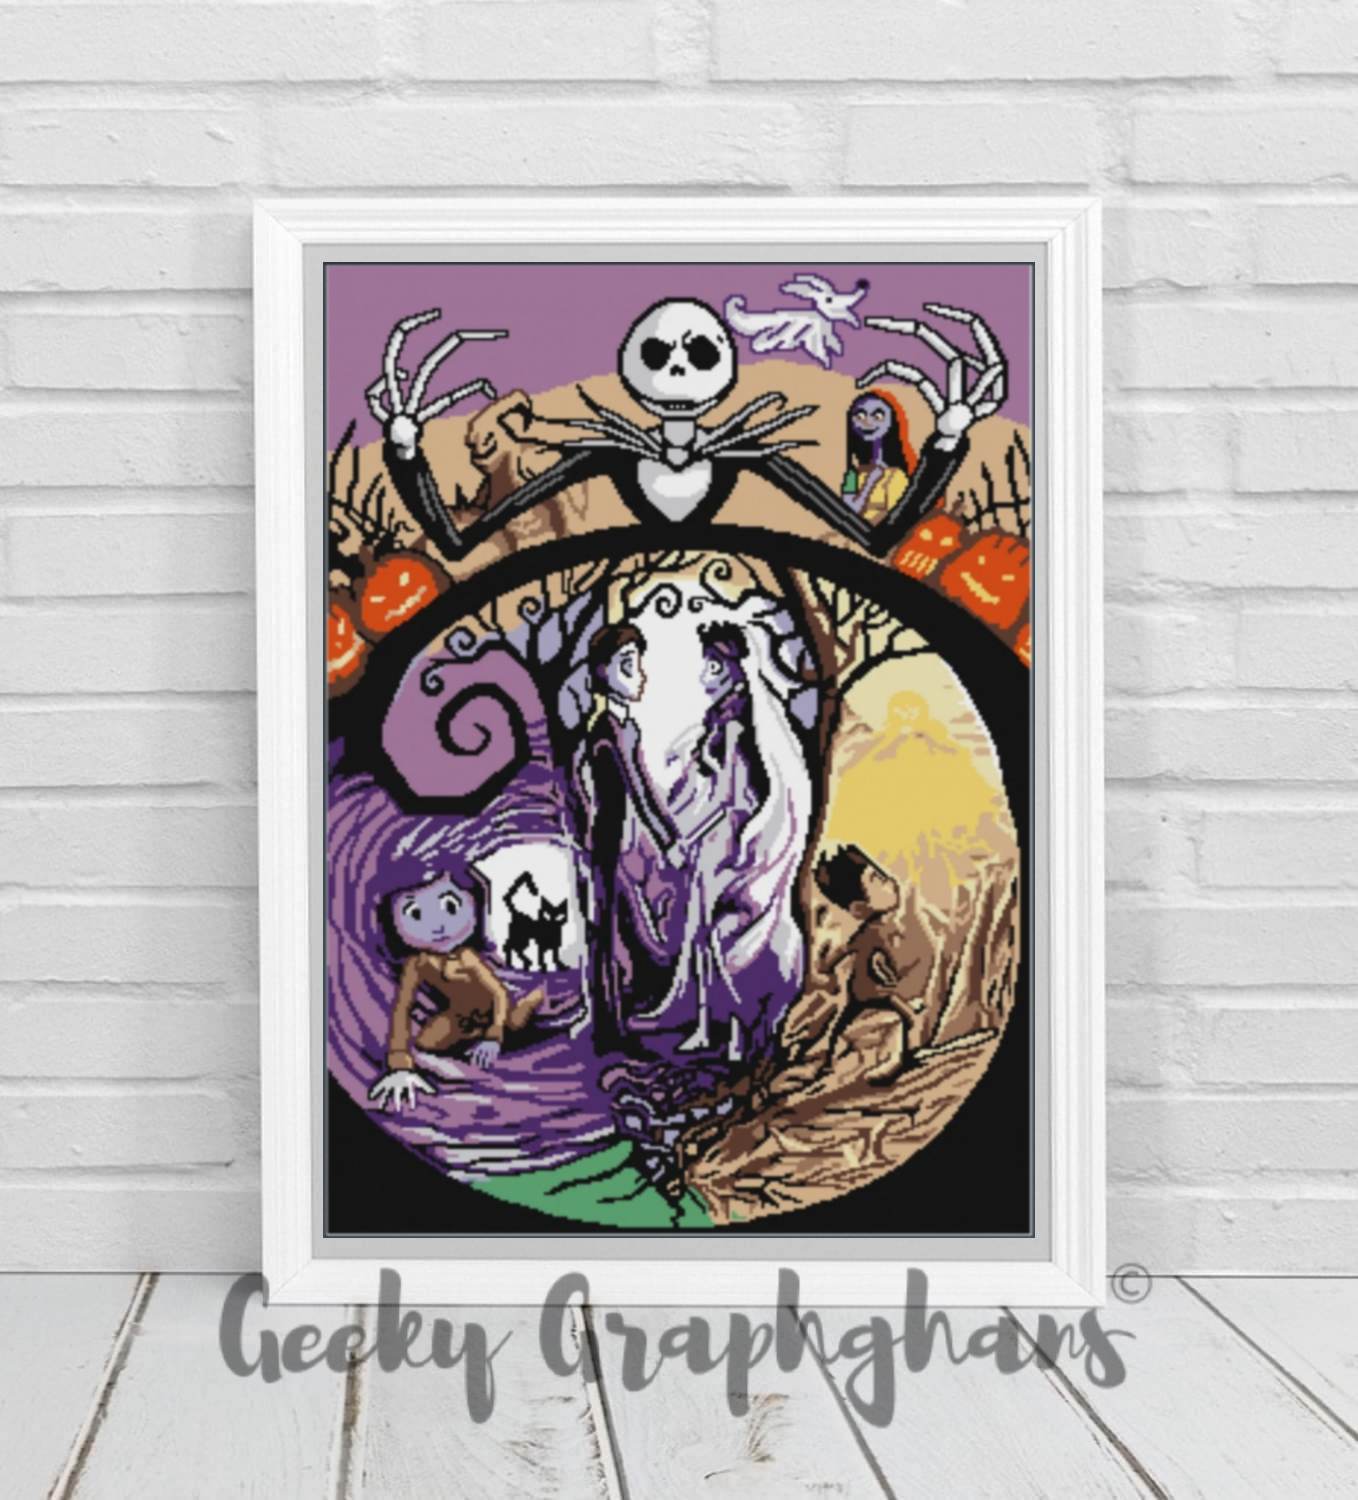 The Nightmare Before Christmas/ The Corpse Bride Mash Up Crochet Graphghan Pattern